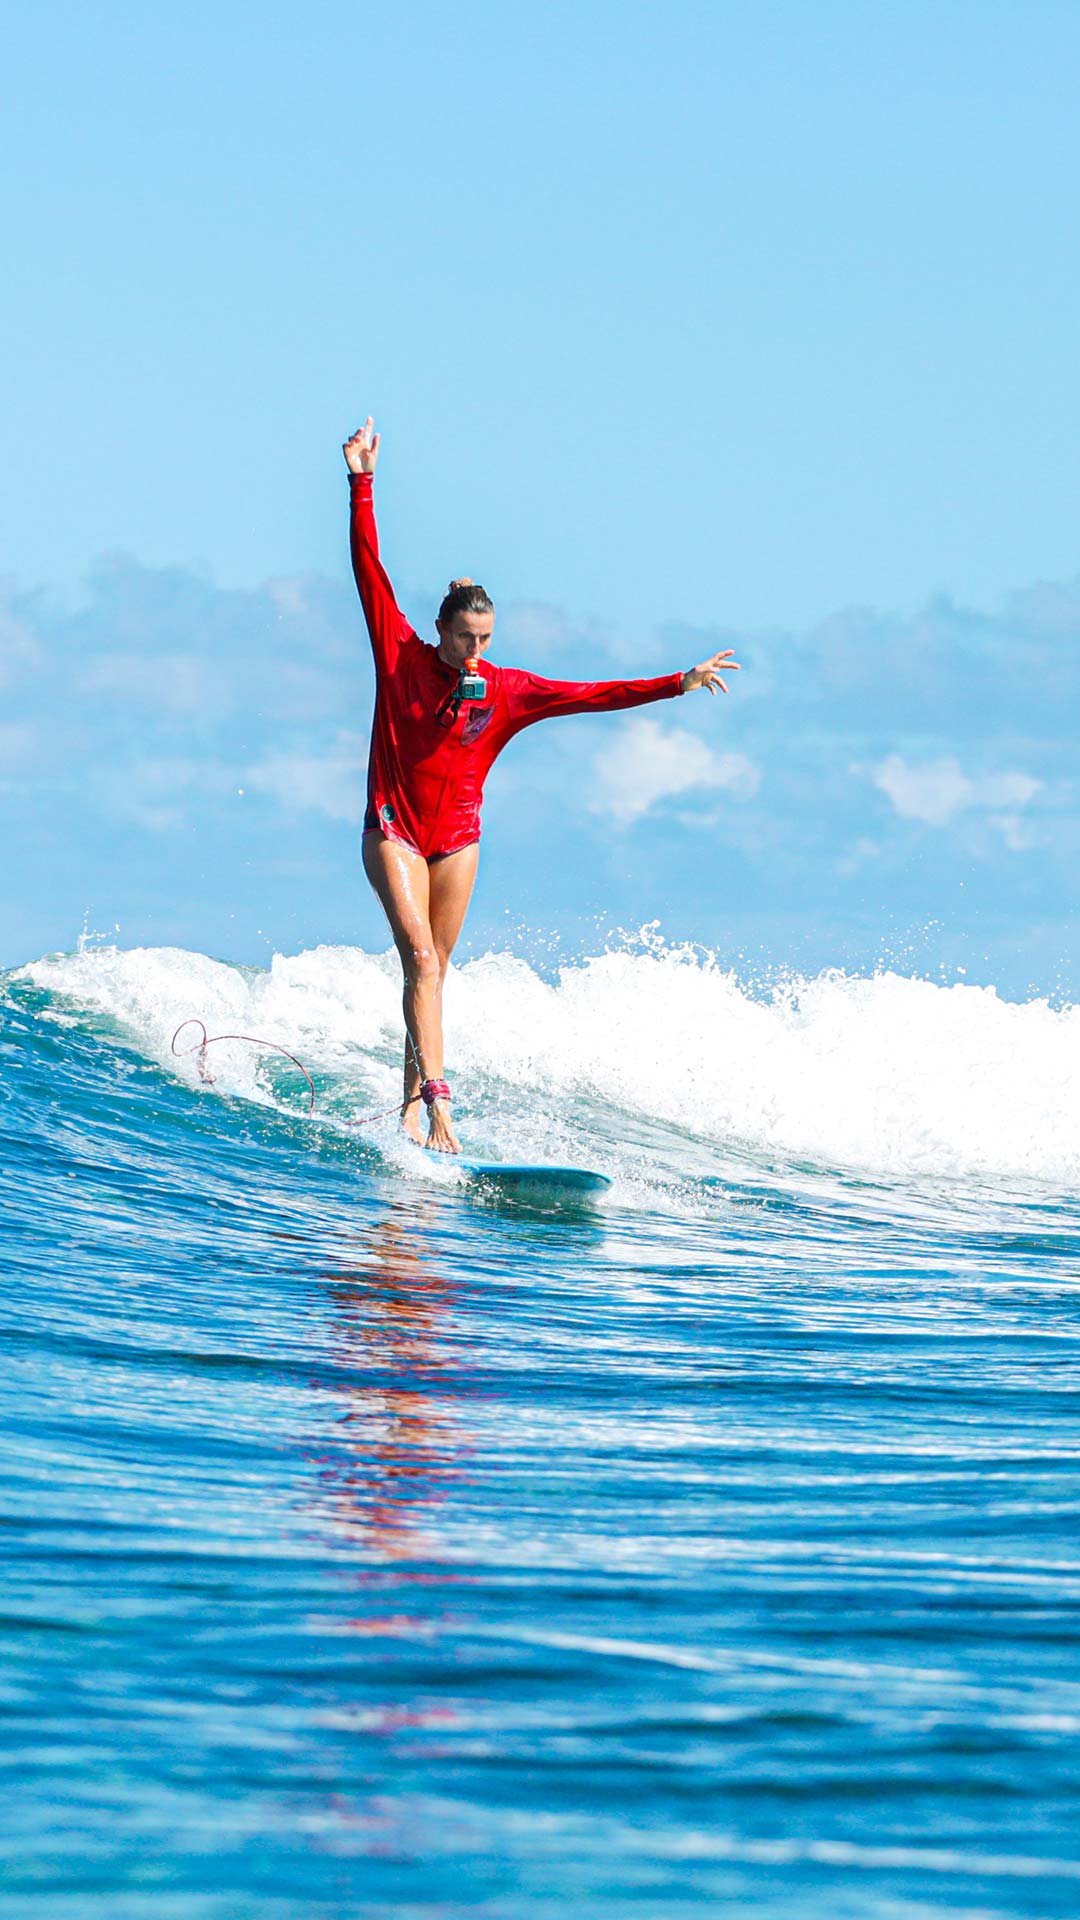 A surf instructor from the Ion Club Mauritius team elegantly surfing a wave and holding a go pro camera in her mouth during one of her courses of surf